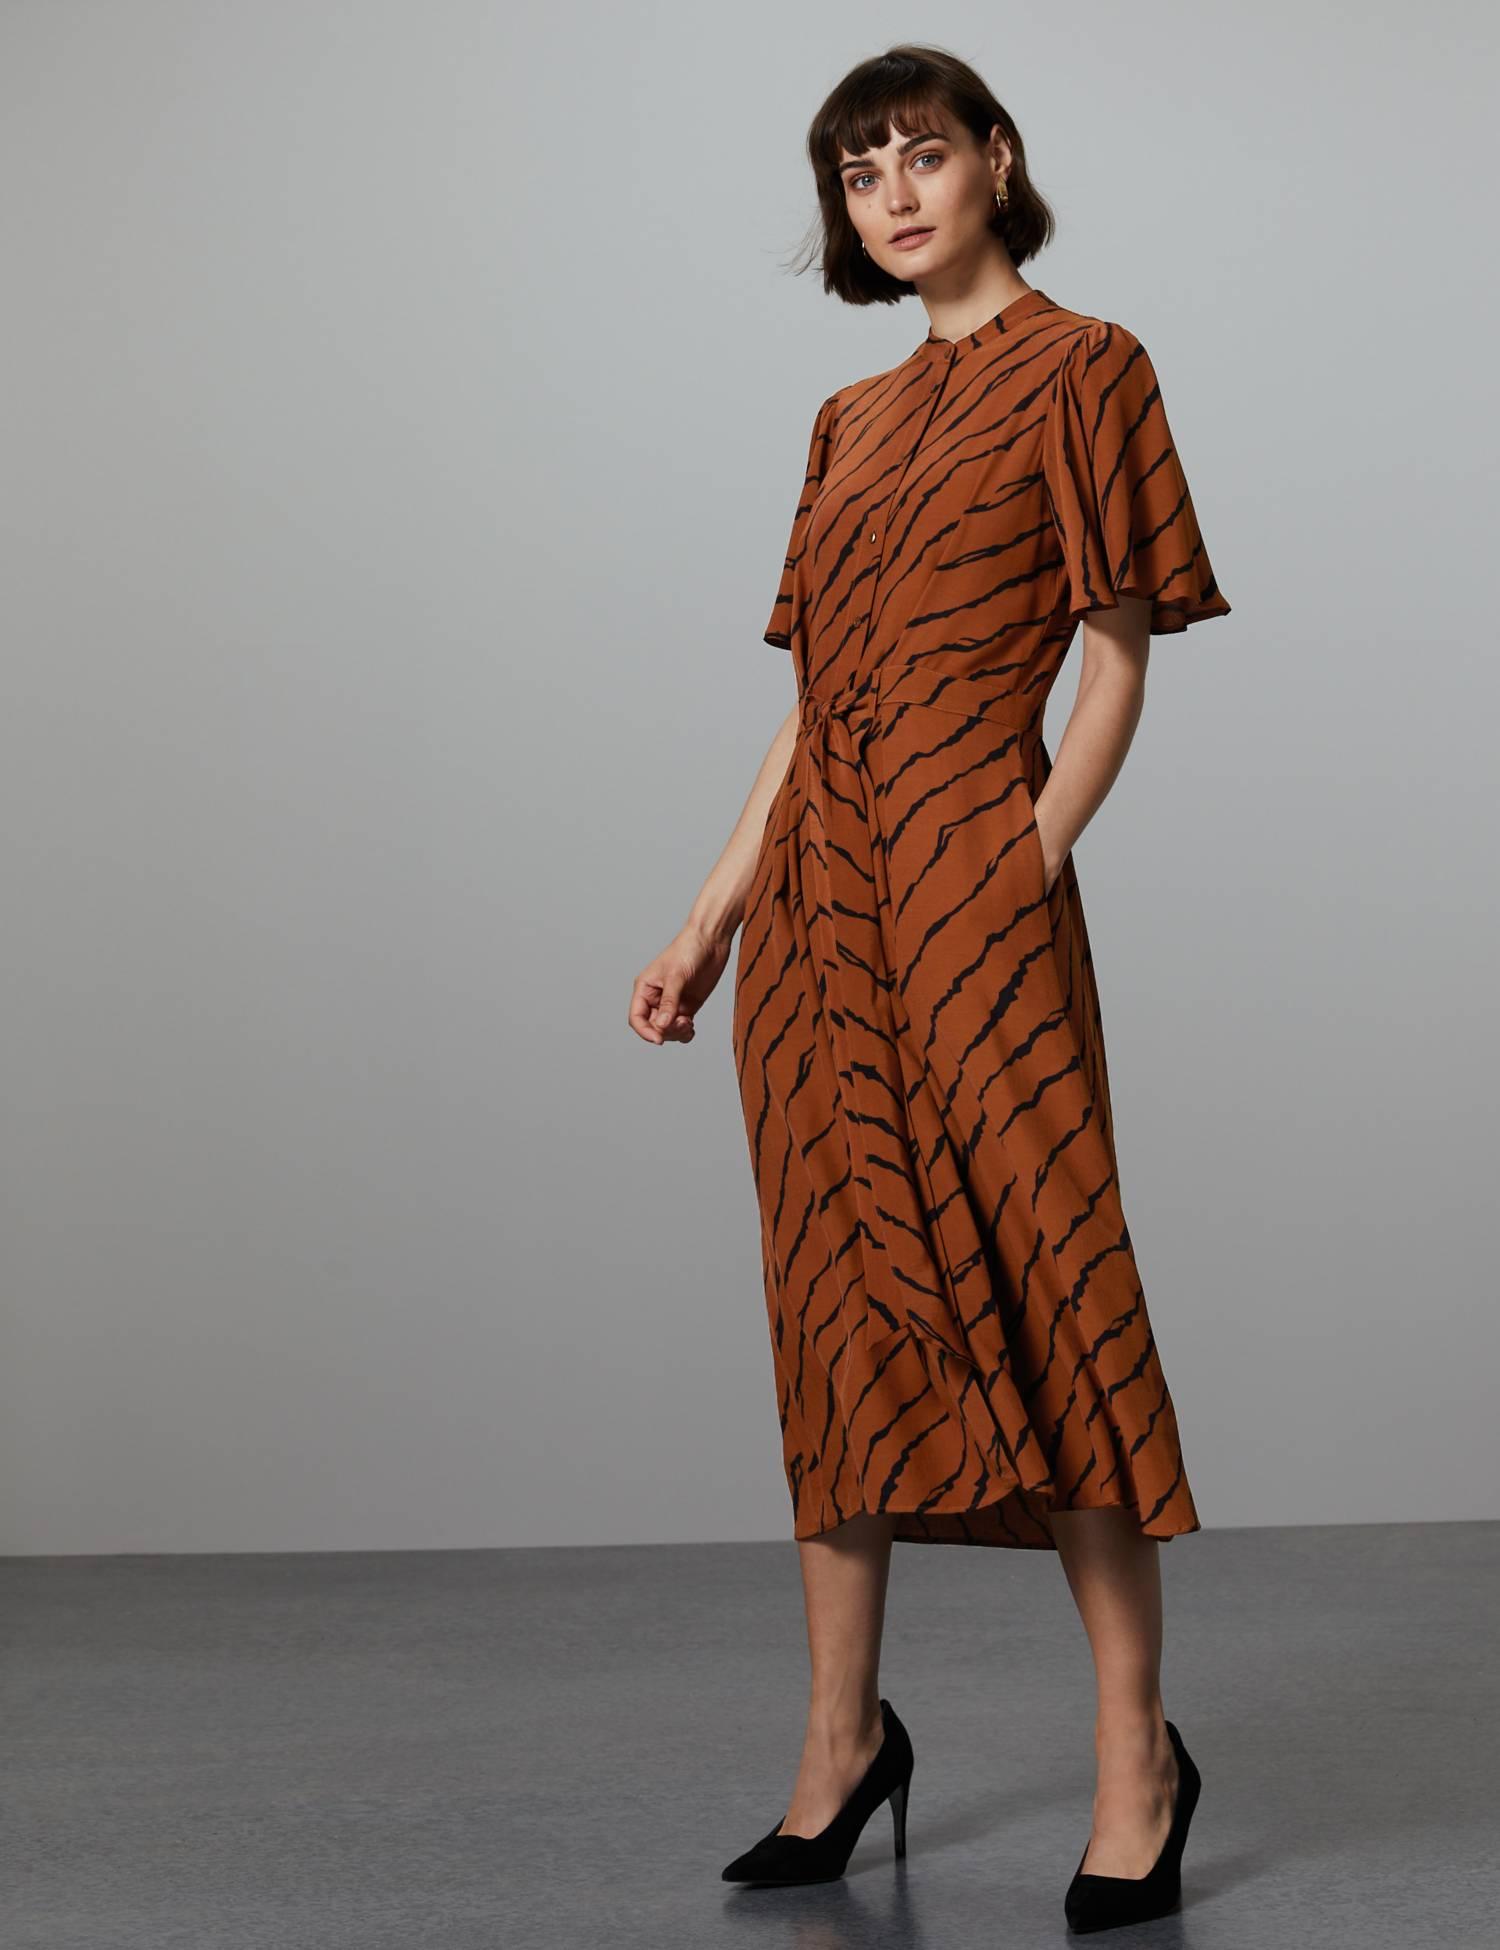 Brown animal print shirt dress - with pockets| Brown outfit inspiration |www.kittyandb.com #shirtdress #chicstyle #dress #dressinspiration